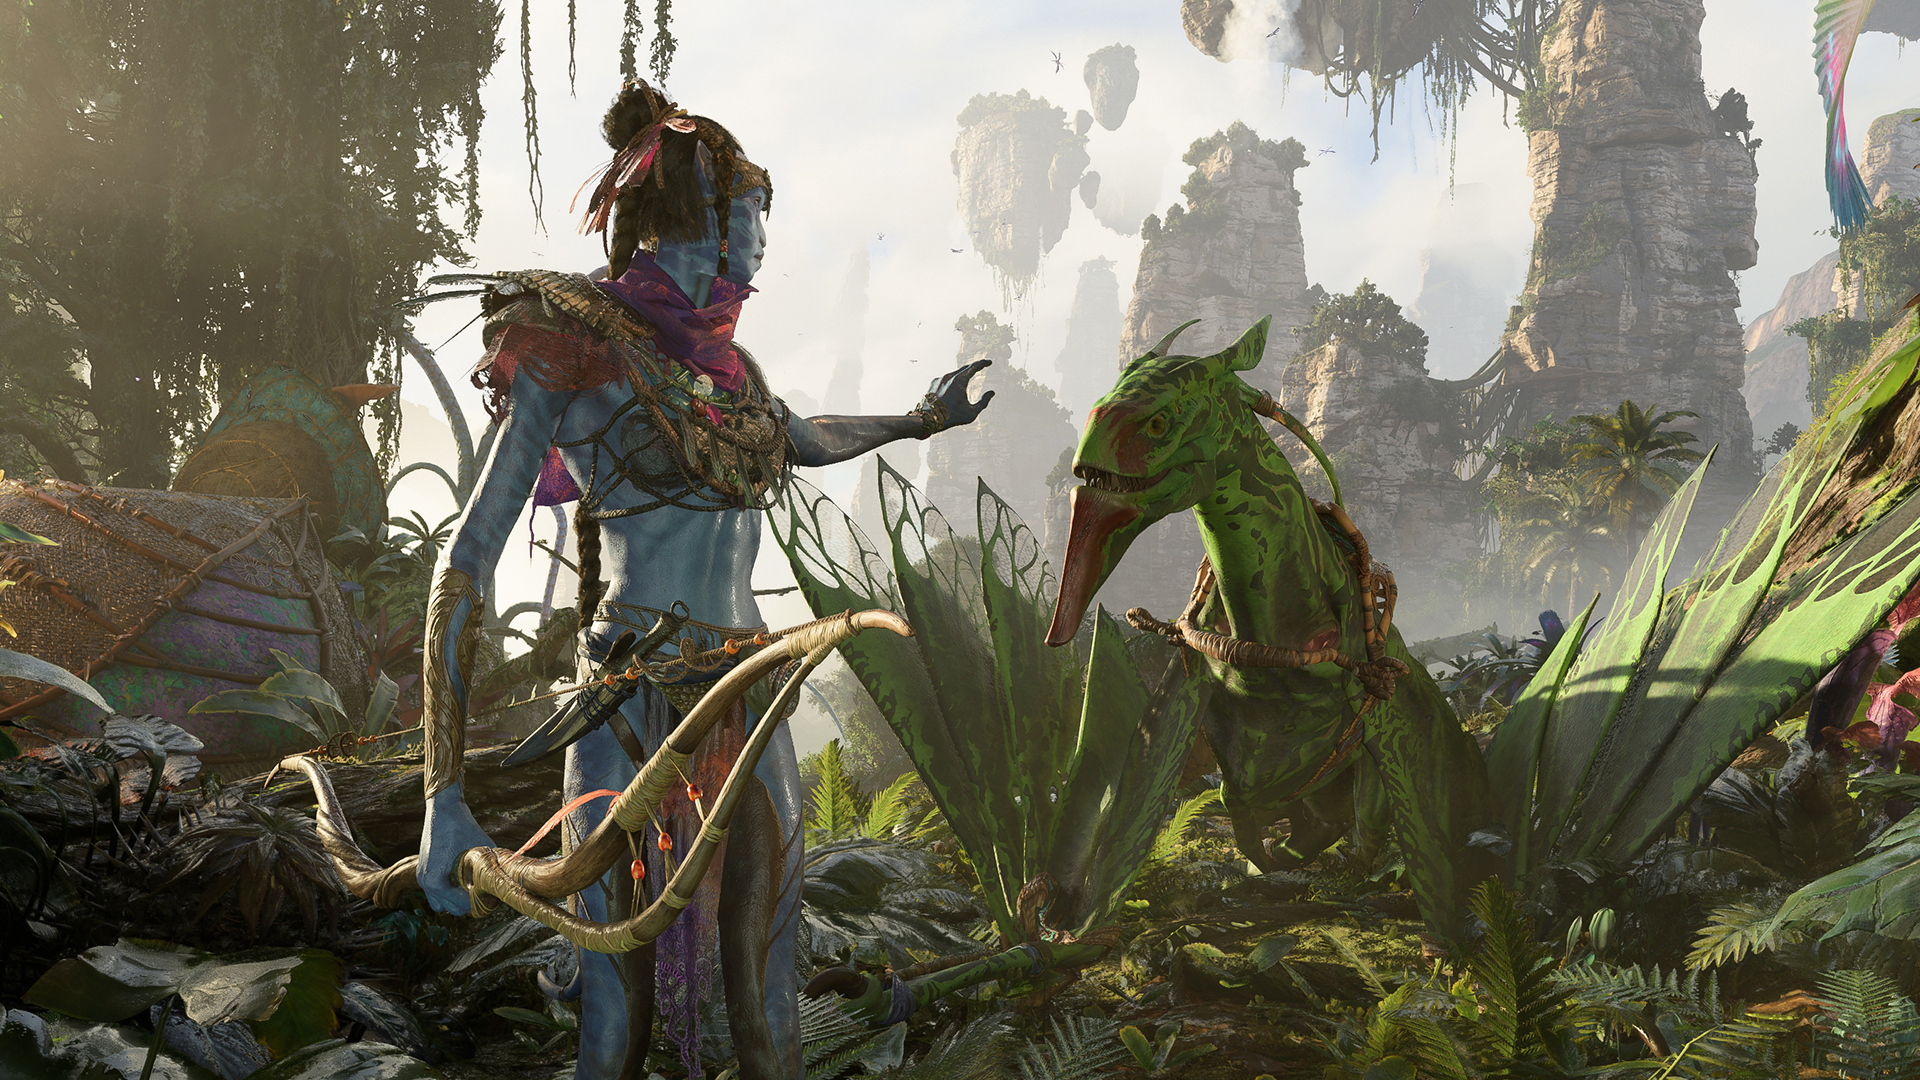  Ubisoft reveals Avatar: Frontiers of Pandora, out next year 